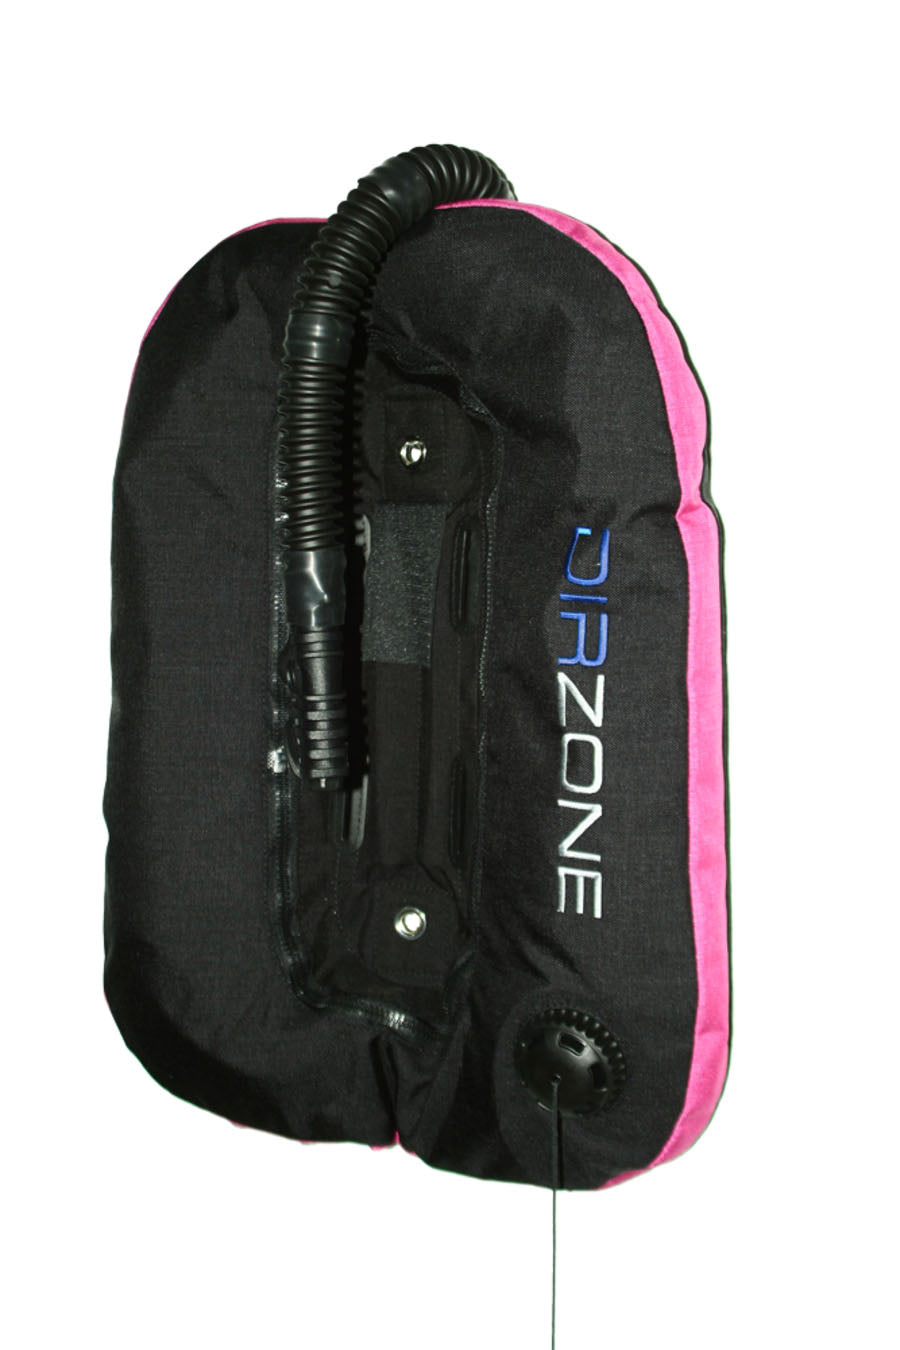 DIRZone Ring 14 Light in Pink for single cylinders 14kg Lift - 90035PK